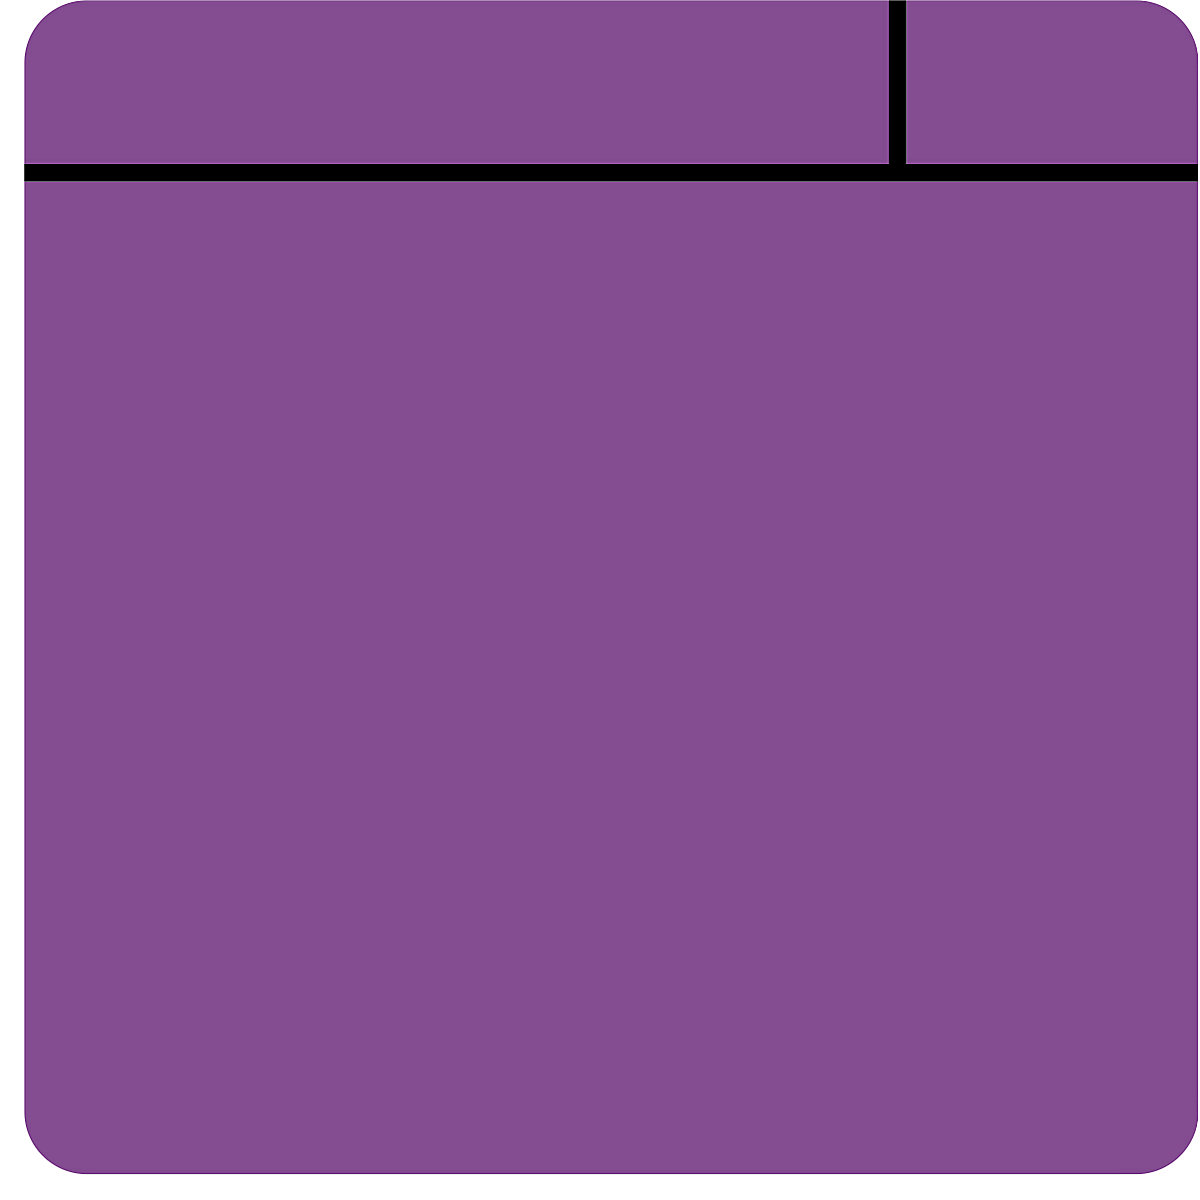 Post-it notes, magnetic, LxW 100 x 100 mm, pack of 10, purple-9